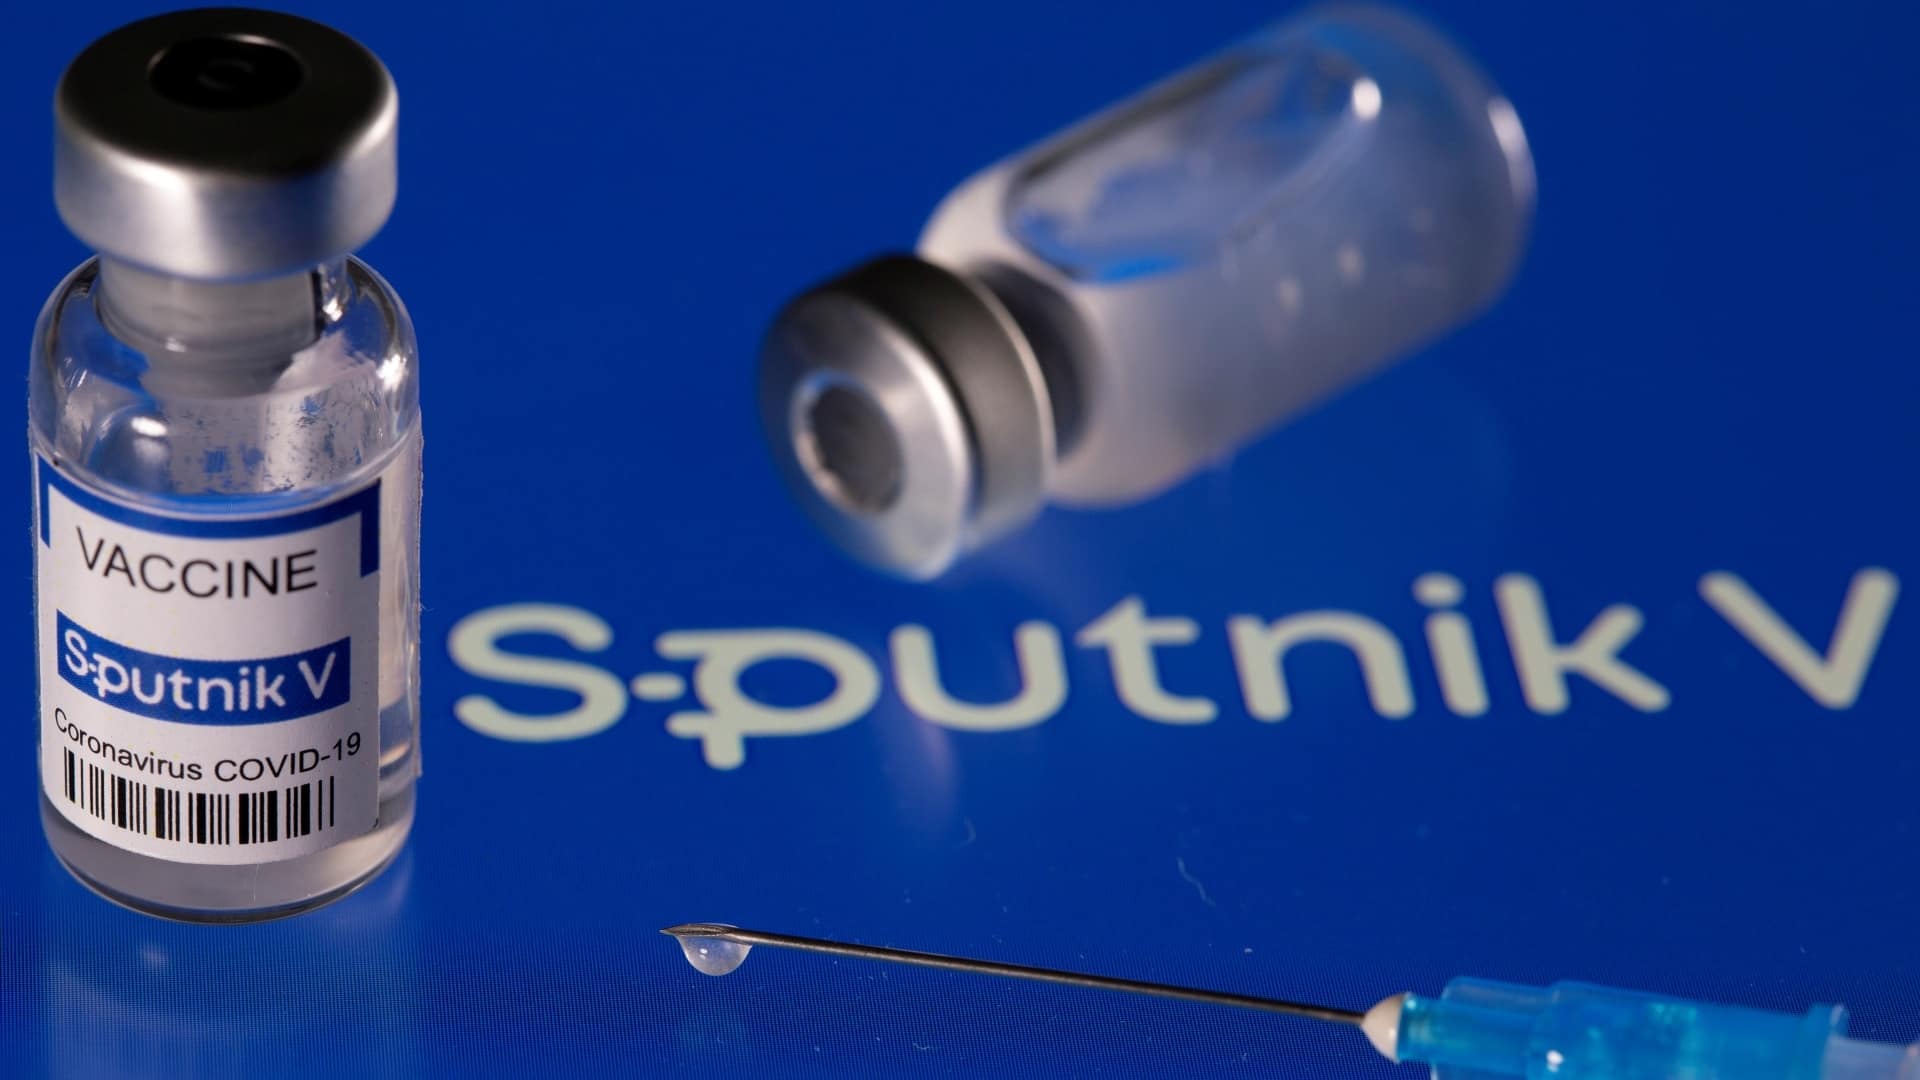 Russia to Deliver Sputnik V COVID-19 Vaccine to India on 1 May